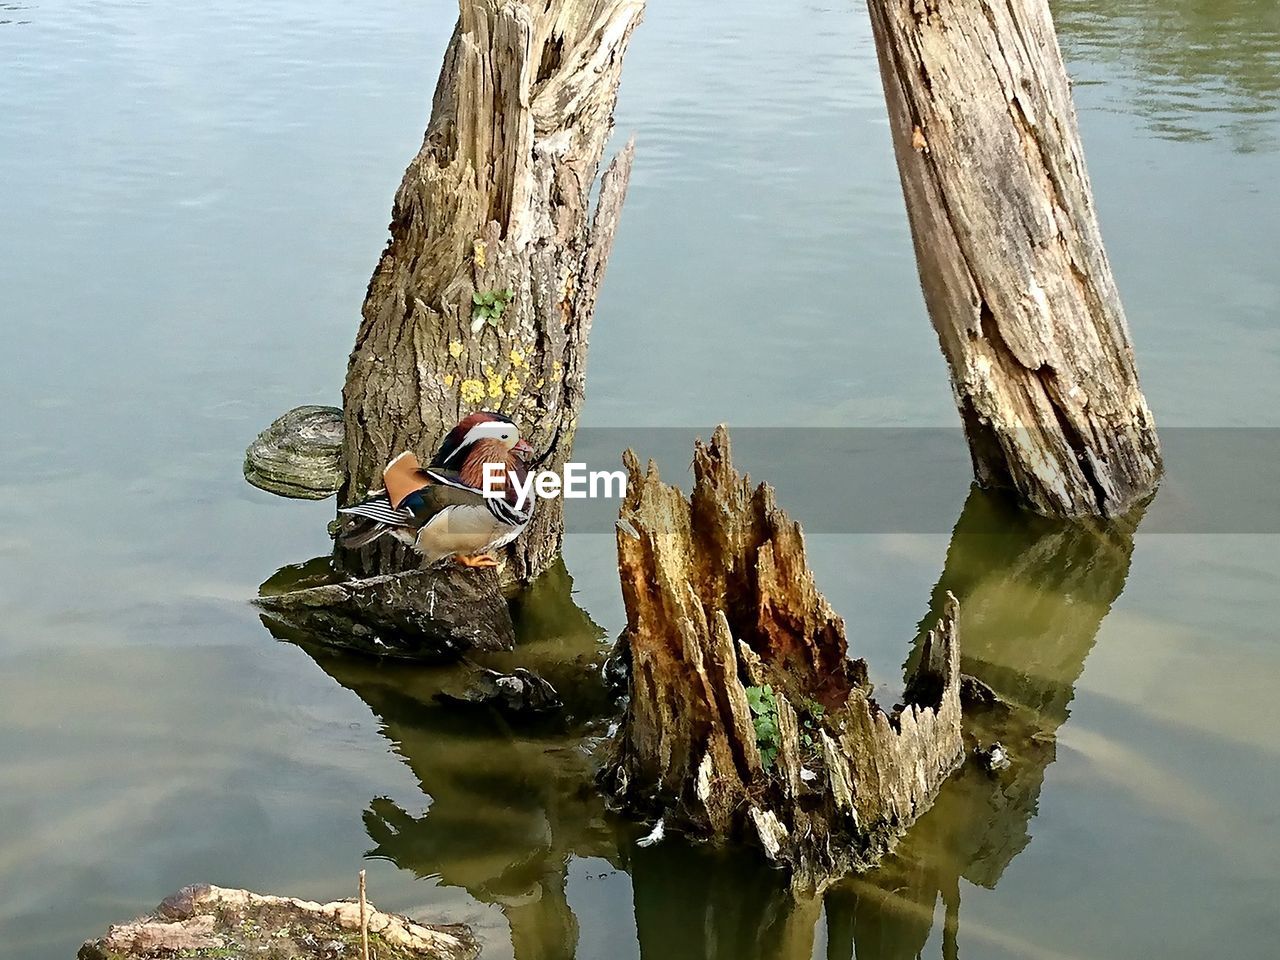 REFLECTION OF WOODEN POST IN LAKE